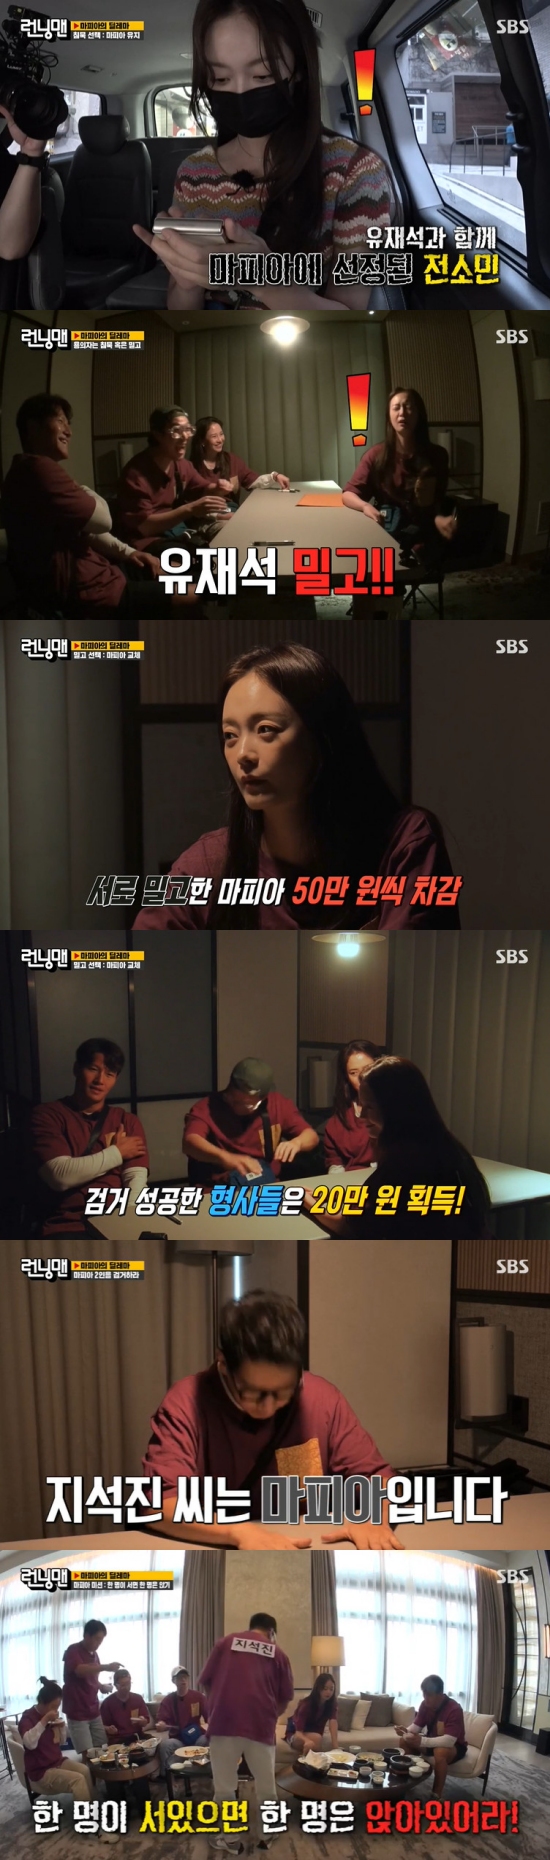 On SBS Running Man broadcasted on the 12th, Mafias Dilemma Race was decorated with the scene where Ji Suk-jin and Haha won the penalty.The production team prepared the Mafia Game, and said, Todays Mafia is not the end of the list. Two multi-voters will be interviewed by members in different rooms.When the interrogation is over, the two people who are interrogated can either silence or push, and they can win or lose the prize money according to the result. The production team said, If both people say Mafia, both can continue without any change if they are silent.They will remain Mafia and continue to carry out the Hidden mission and make more money.But if one pushes and one pushes silent, the one who pushes benefits, but only one silent loses one million One. Mafia gets a new draw.If both are pushed, both will be cut by only 500,000 Ones; Mafia will be re-drawn, explained the rule.In particular, the first Mafia was Yoo Jae-Suk and Jeon So-min, and performed the Hidden mission with an opening talk for three minutes in a group chat room.The members interrogated Yoo Jae-Suk and Yang Se-chan as Mafia, and both Choices silence.Yoo Jae-Suk and Jeon So-min continued to act as Mafia, while Kim Jong-kook considered Jeon So-min a prize winner.In the end, Yoo Jae-Suk and Jeon So-min were interrogated in the second Mafia spot, and the two of them pushed each other and lost 500,000 One each.The new Mafia were Ji Suk-jin and Haha.Ji Suk-jin and Haha performed the Hidden mission during lunch, while the Hidden mission was one standing during lunchtime, one sitting unconditionally.In the process, Yoo Jae-Suk said, Why do not you keep going back and forth? I was horrified. Who is the most common person to do what I usually do?I do not get up well because I sit down and do not get up well. I go back and forth today.Eventually, Yoo Jae-Suk noticed the Hidden mission, saying, Why do one person sit when one person wakes up? Ji Suk-jin and Haha continued the Hidden mission with Shichimi.In addition, Ji Suk-jin and Haha spoke before being questioned, and Haha said, If I betray you this time, dont look at me. I swear. Believe me.Ji Suk-jin promised to remain silent but chose to push Haha out of faith to the end.But Haha remained silent, with one million One deducted by himself; the angry Haha visited Ji Suk-jin, and said, I drove Ji Hyo-rang to Somin.If you were silent, you would not take the next game. Give me 100,000 One quickly. Ji Suk-jin said, Did you change the character? And he was embarrassed and gave Haha 100,000 One.The last Mafia were Kim Jong-kook and Jeon So-min, and the two were not arrested for completely deceiving the members.Kim Jong-kook and Yang Se-chan won first and second respectively, while Haha and Ji Suk-jin won sixth and seventh respectively.The penalty was buying chocolate, and Haha and Ji Suk-jin had to buy chocolates for Kim Jong-kook and Yang Se-chan as a commodity.Photo = SBS broadcast screen